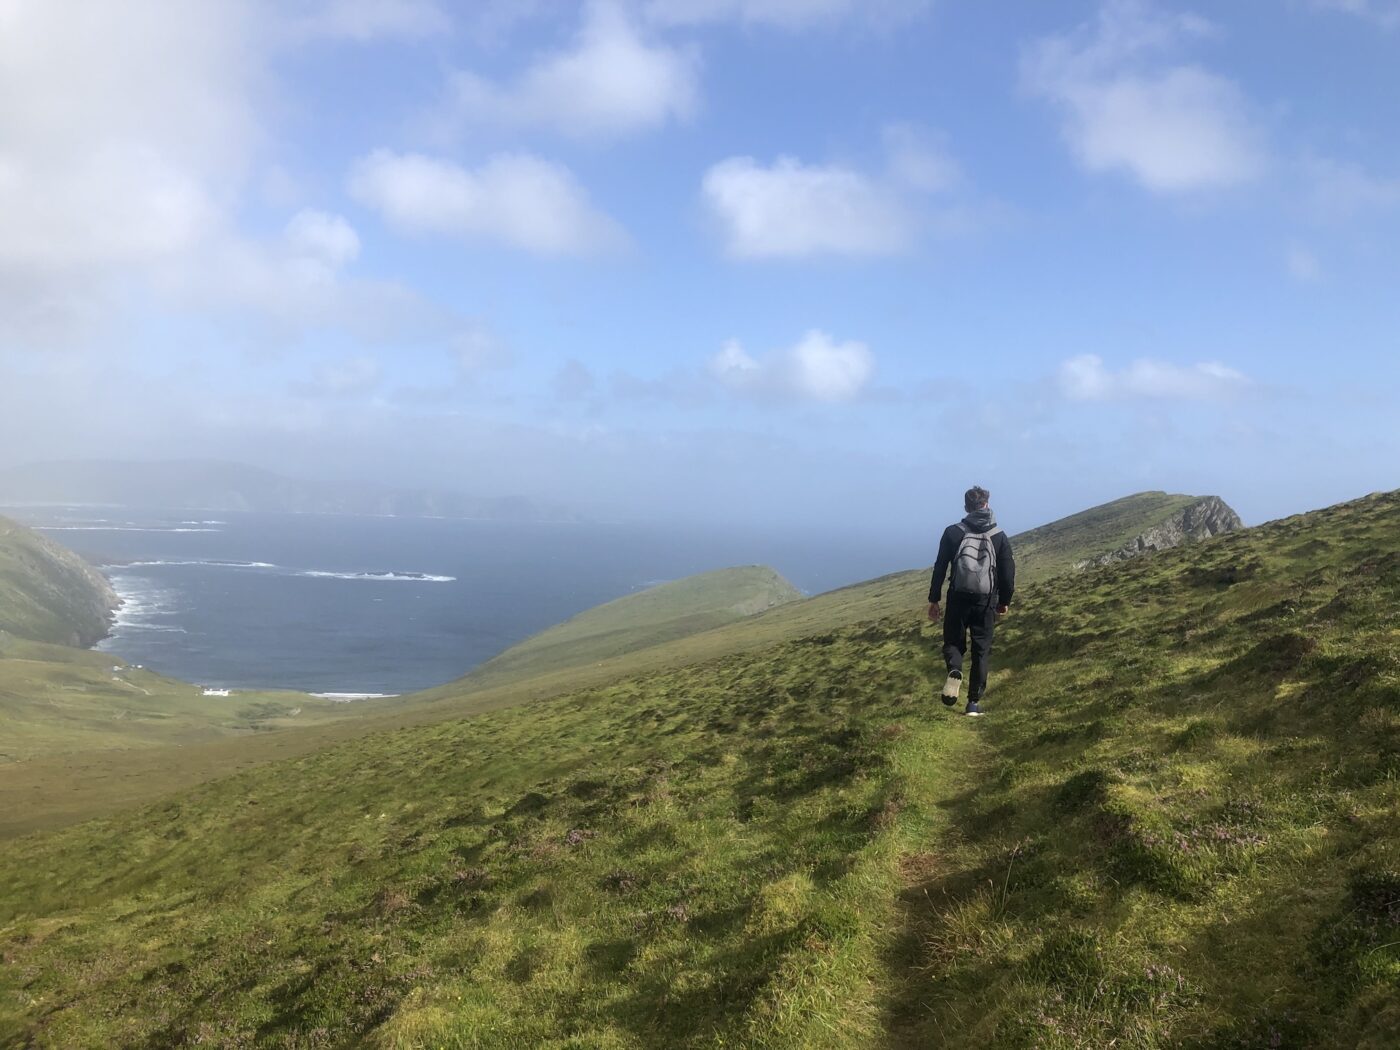 Joseph Rector hikes a grassy hillside along the shore of Ireland's coastline with the ocean in the distance.